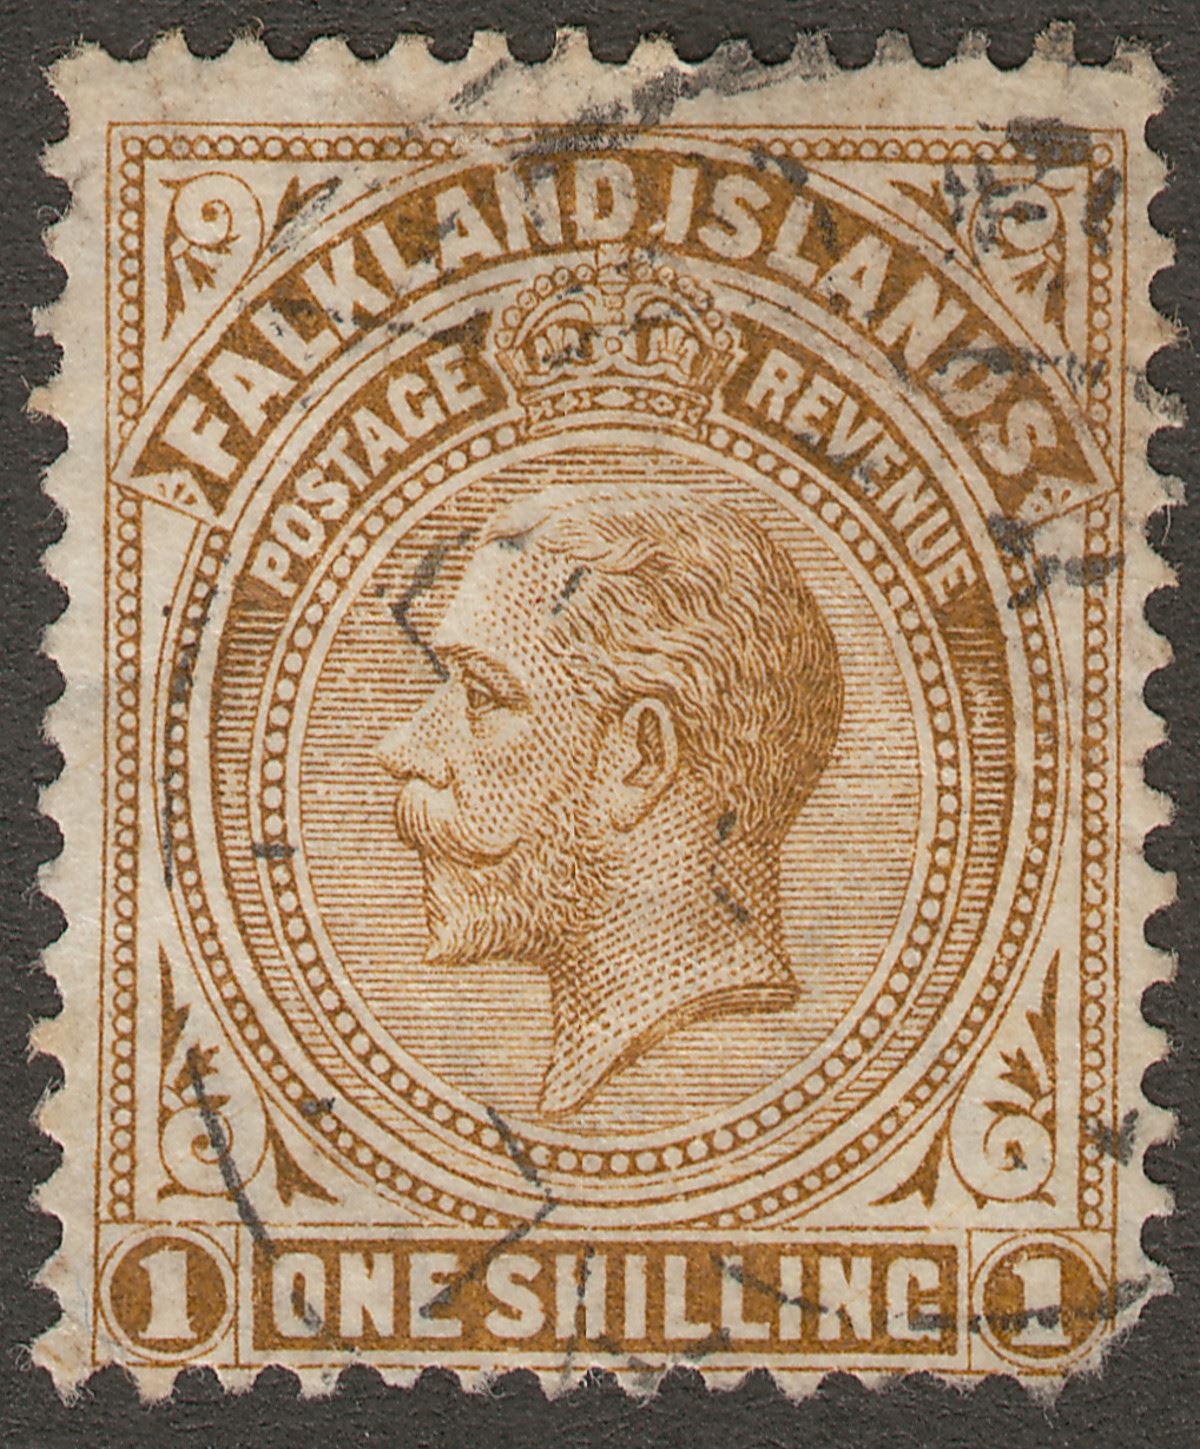 Falkland Islands 1919 KGV 1sh Pale Bistre-Brown Used SG65a cat £130 with faults